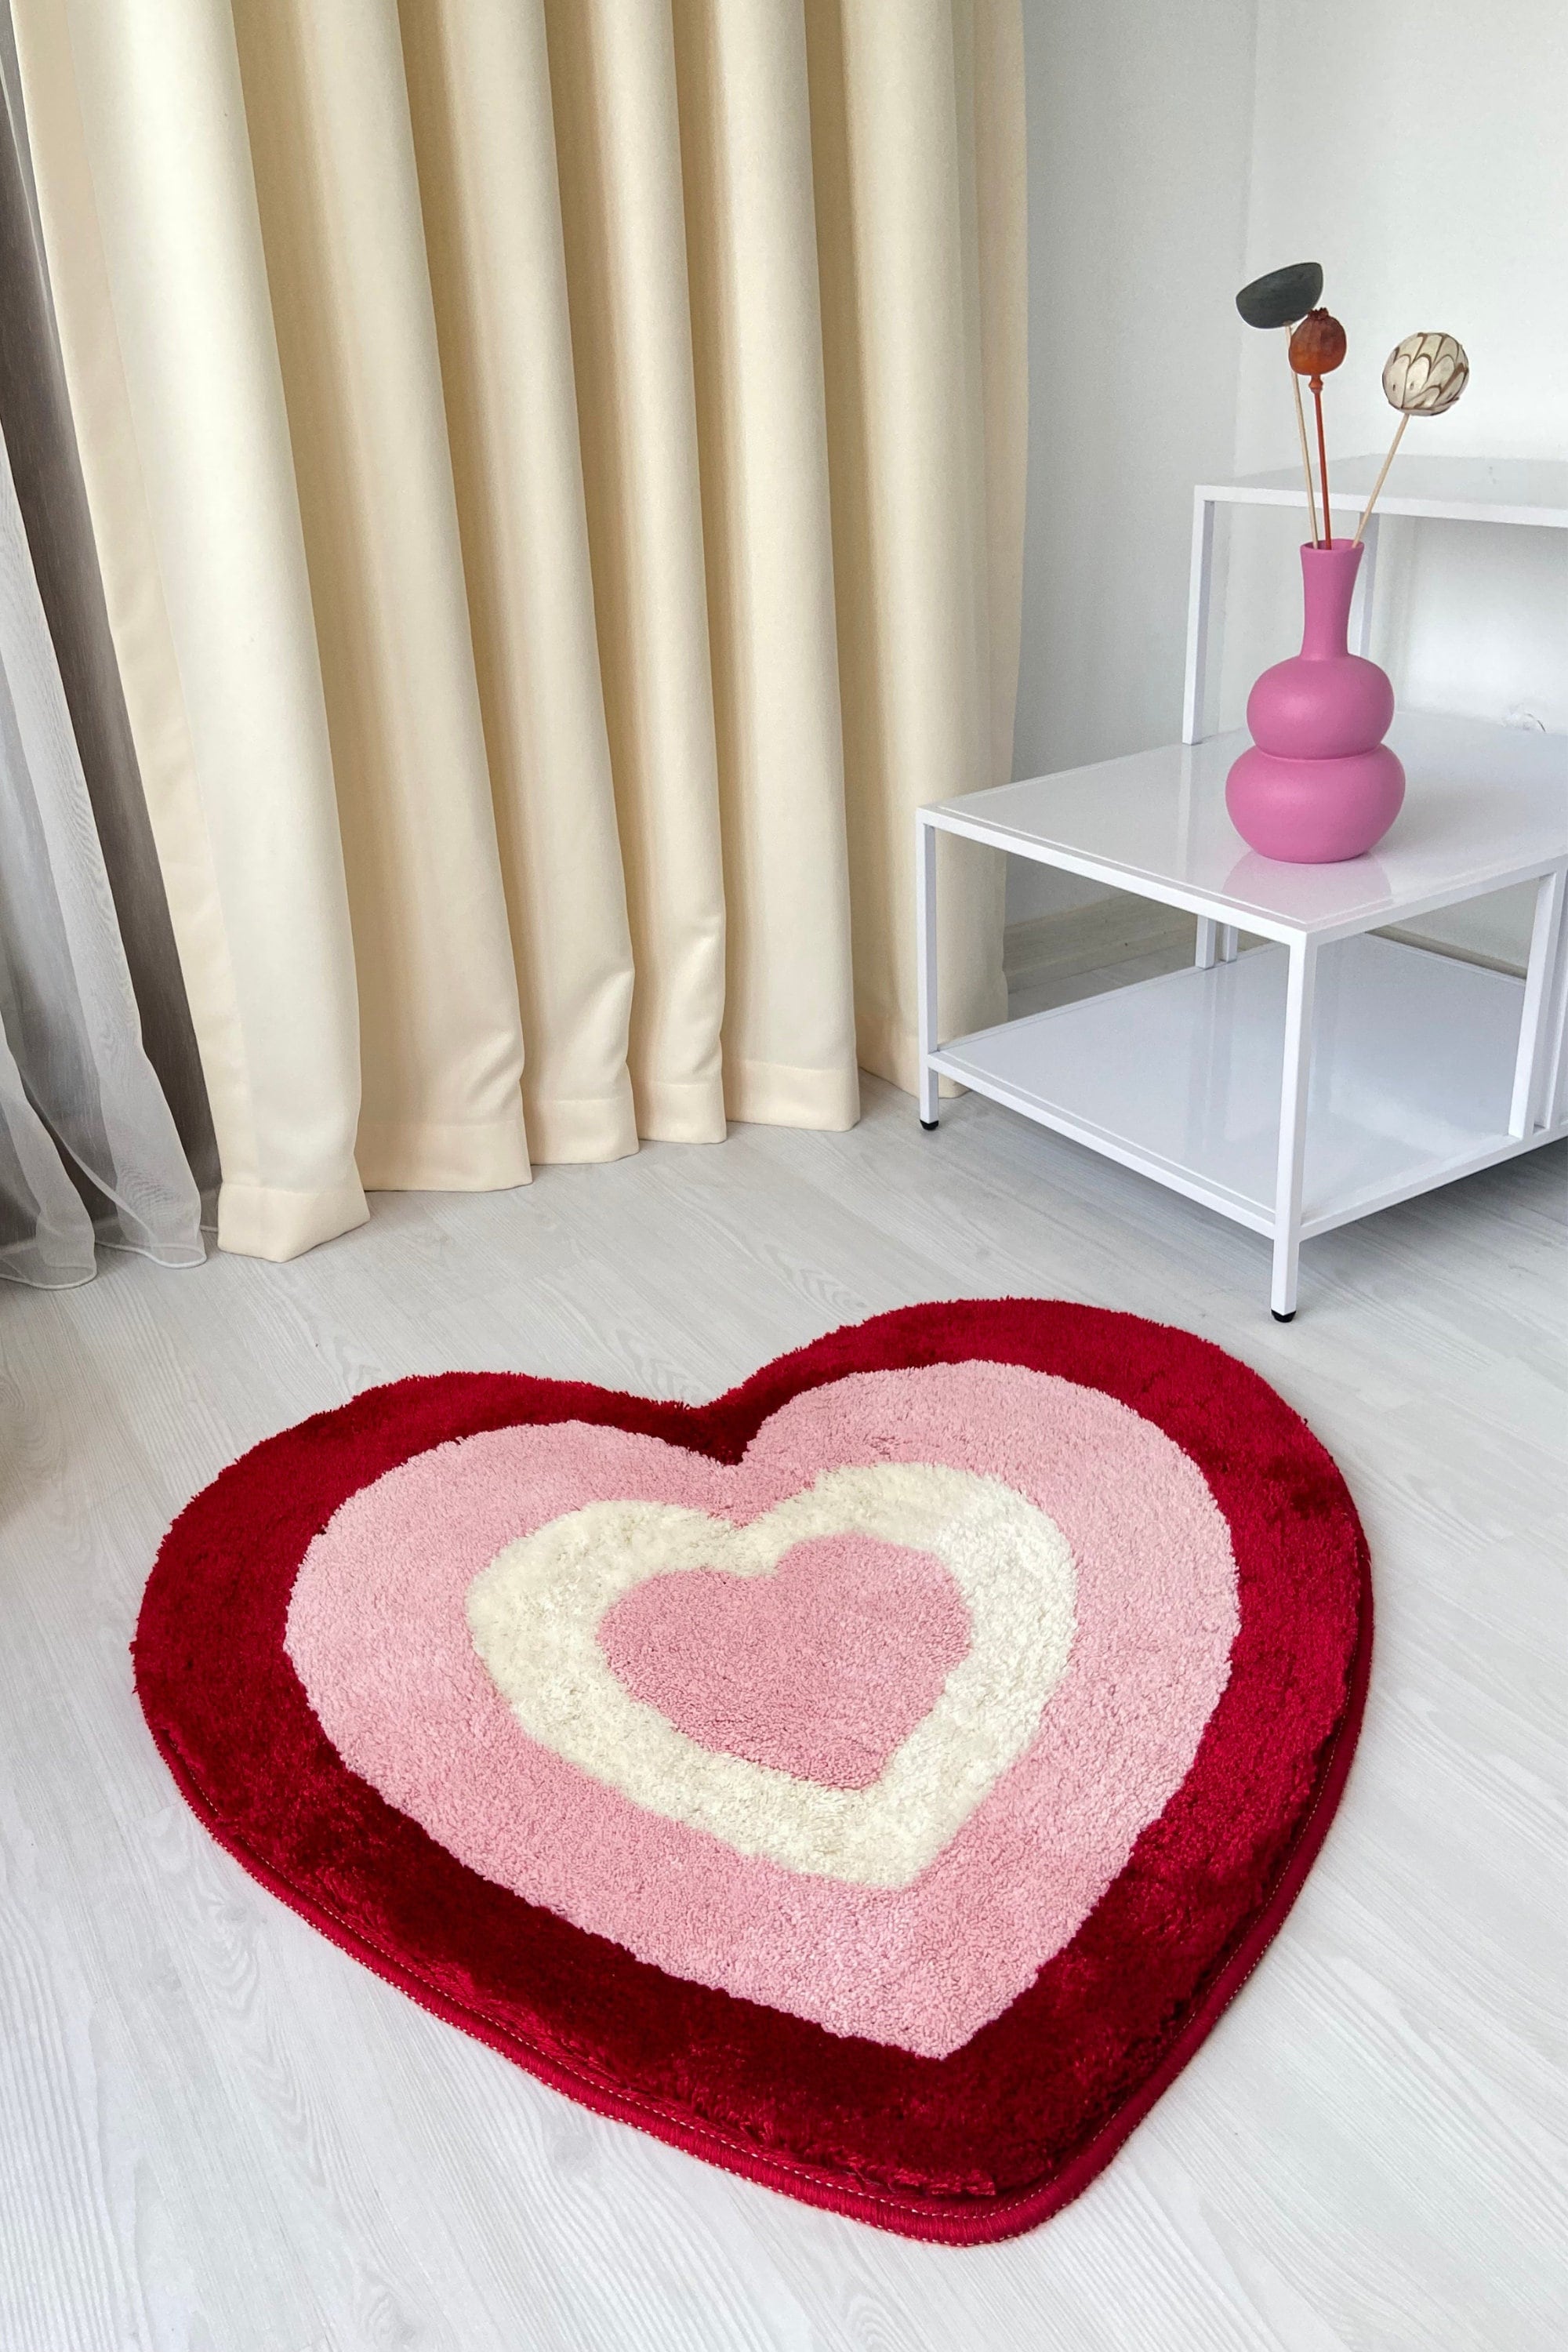 Apple Bathroom Rugs and Mat, Cute Kids Bath Doormats Decor Rug, Red Tufted  Plush, Machine Washable Luxury Shaggy High Absorbent and Anti Slip Foot